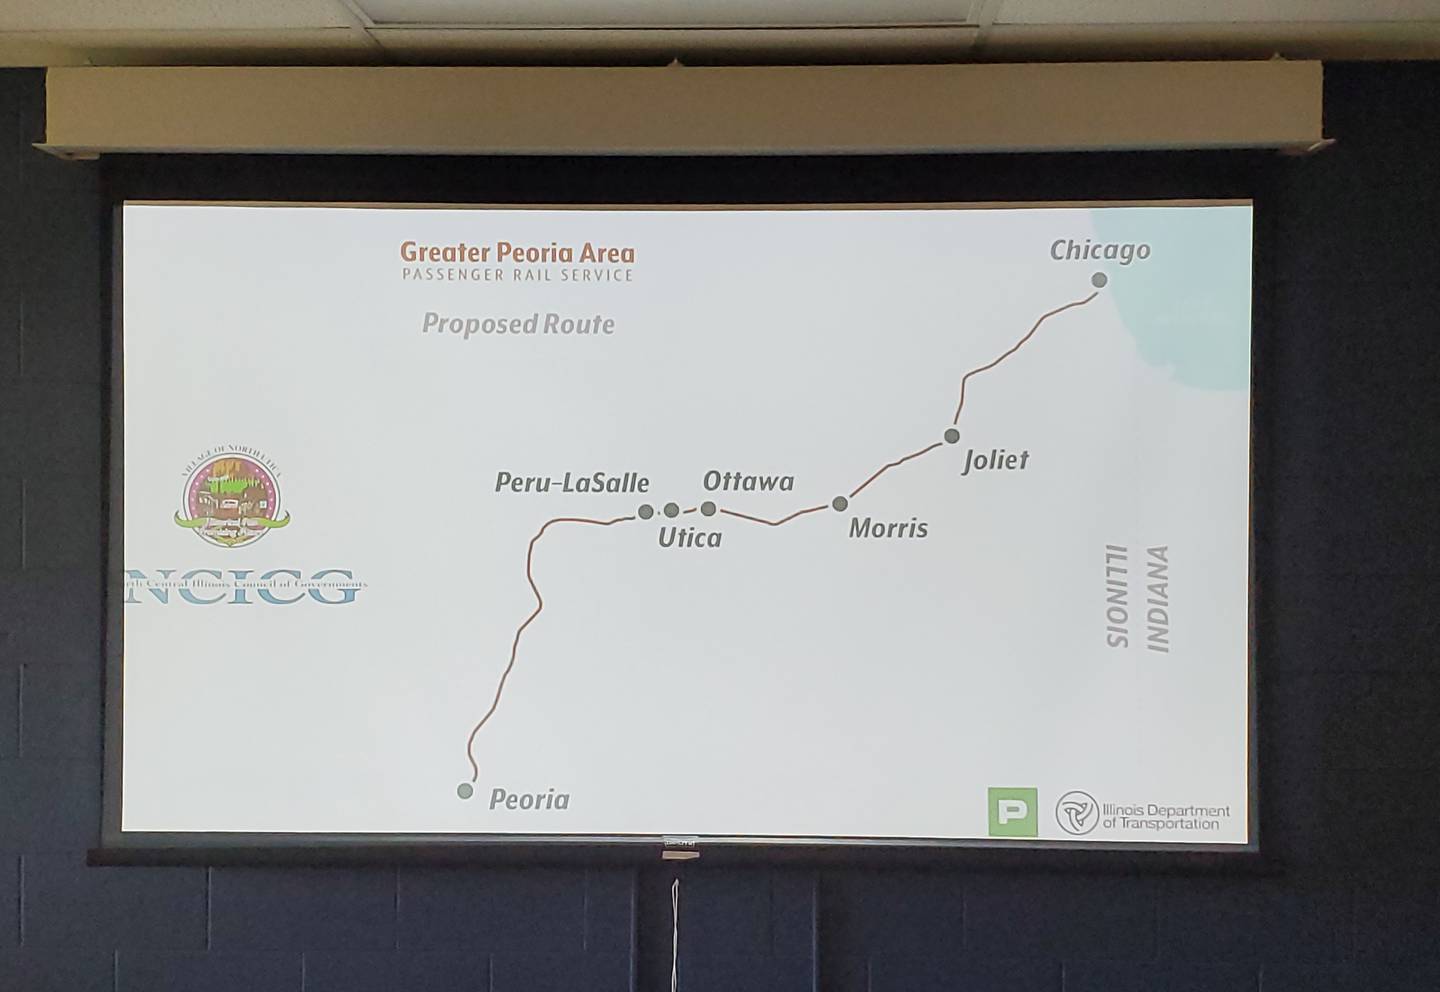 Multiple proposed routes were evaluated for the possible service as the group stated the most likely route would include stops in La Salle-Peru, Utica, Ottawa, Morris and Joliet in between Peoria and Chicago.